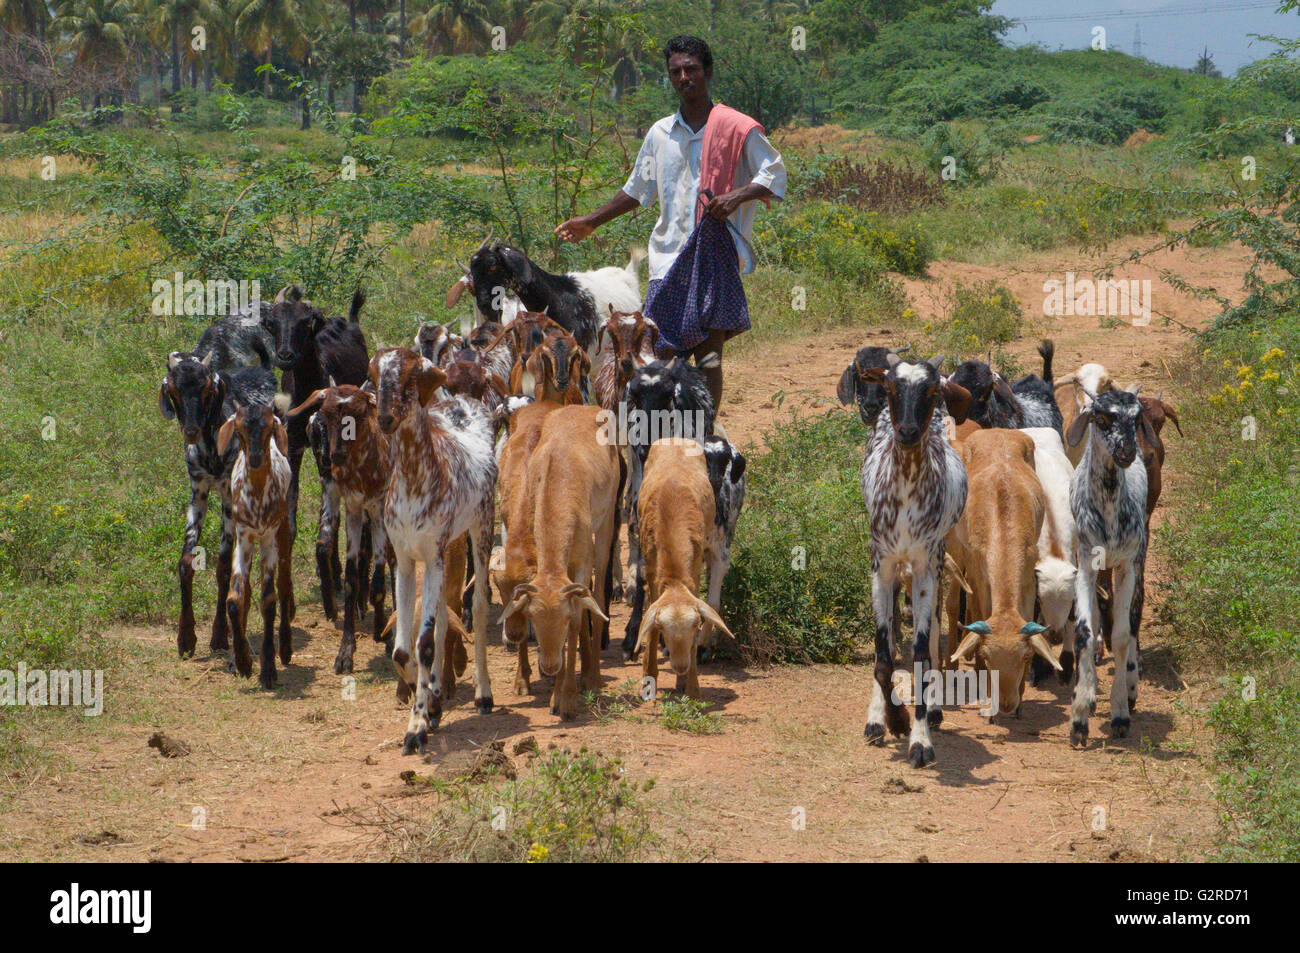 An Indian Shepherd with Goats Stock Photo